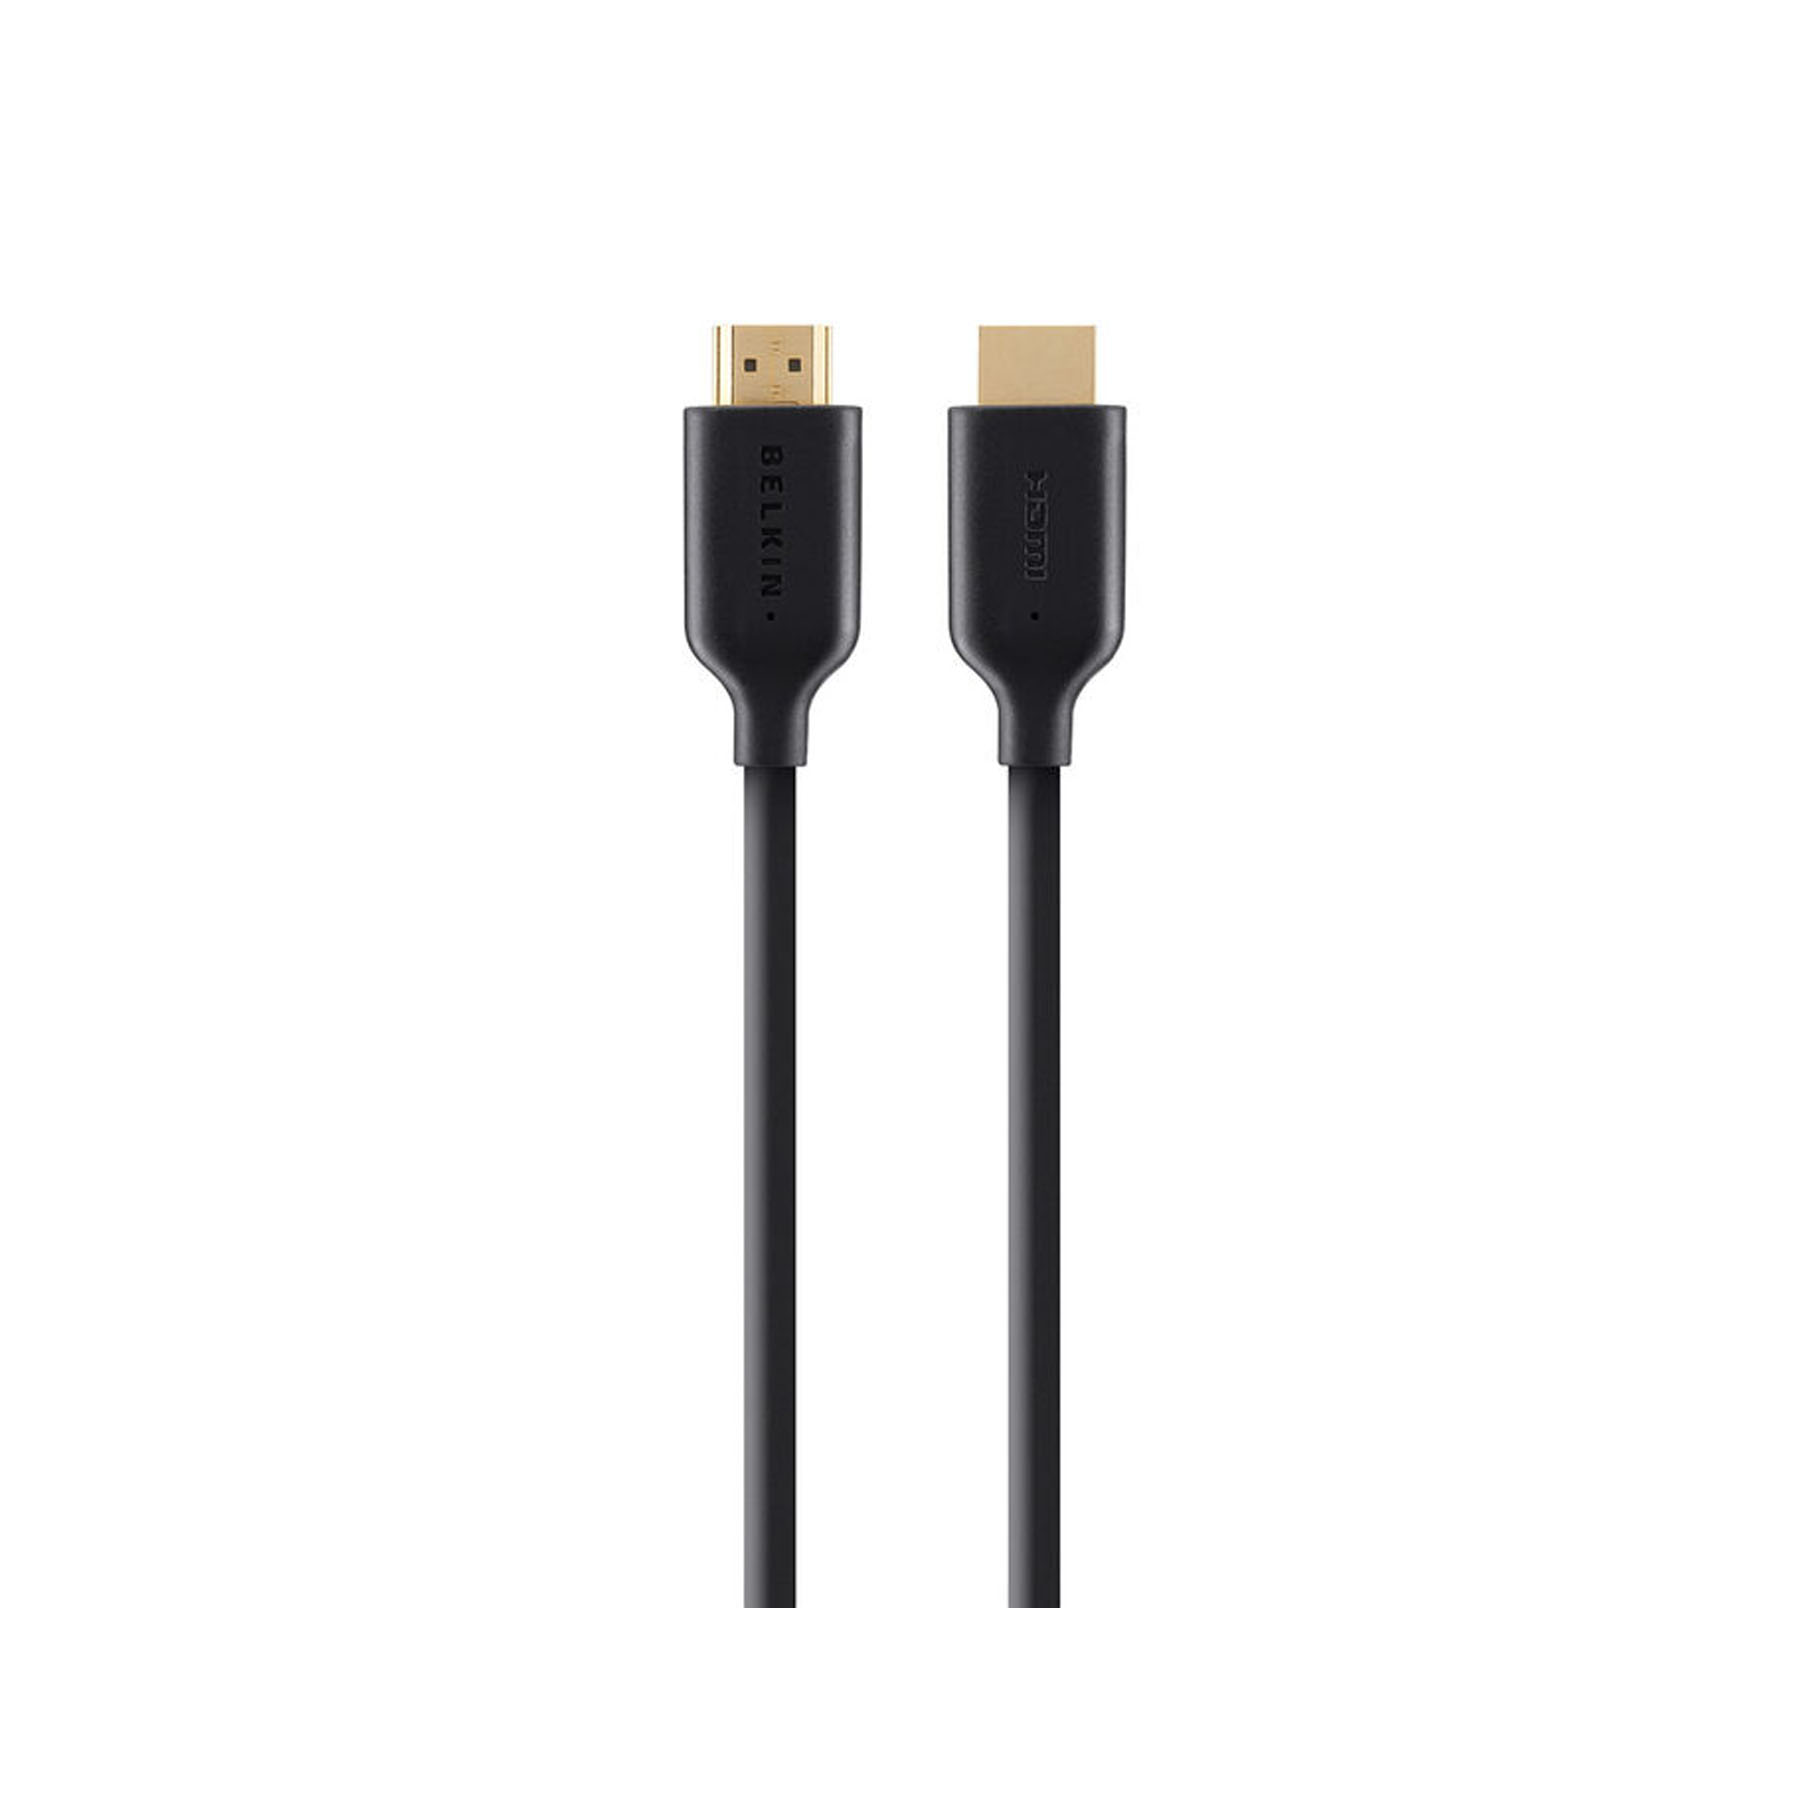 Belkin Gold-Plated High-Speed HDMI Cable with Ethernet F3Y021bt1M